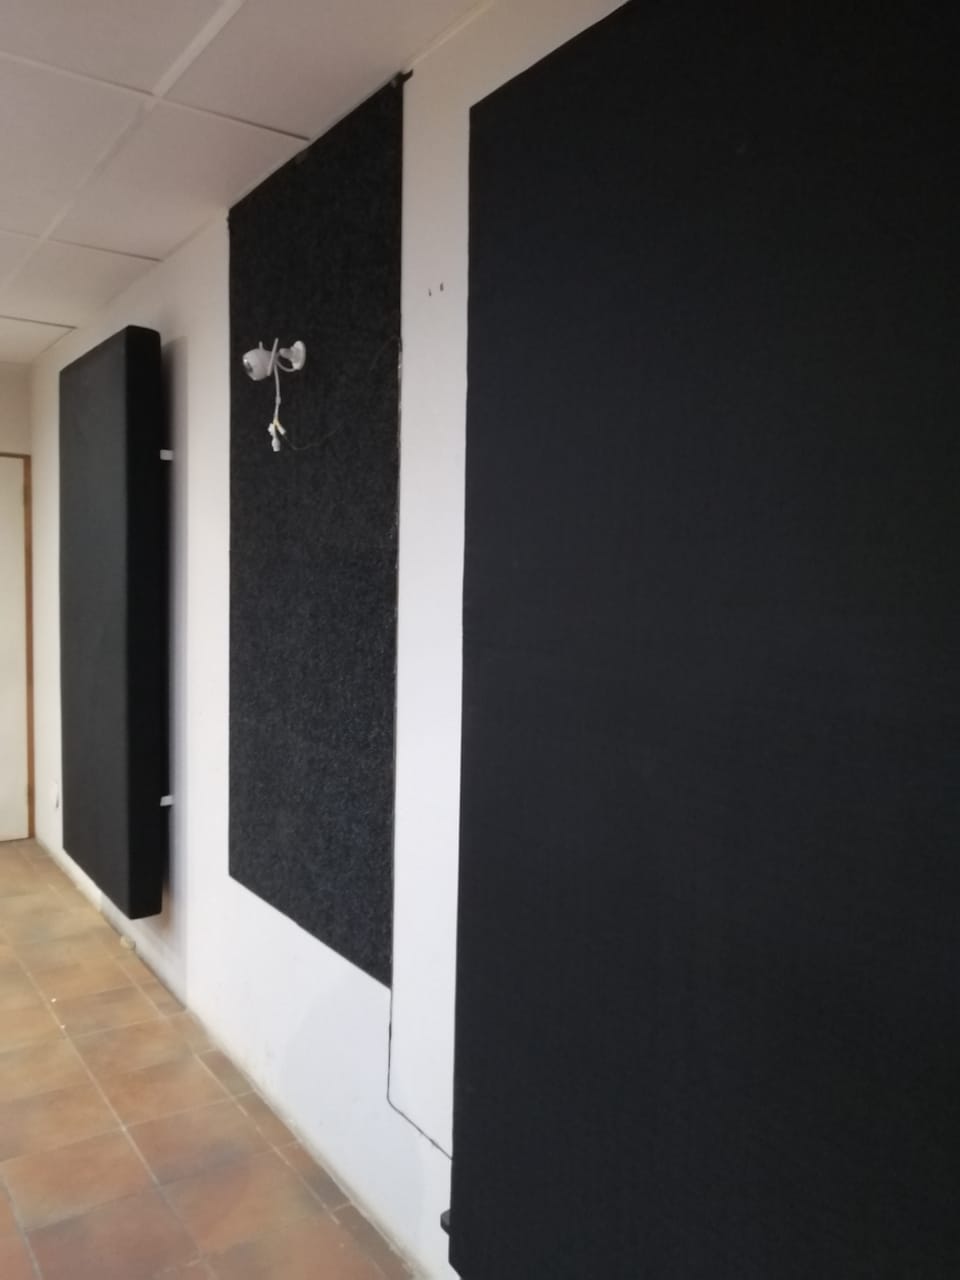 Acoustic Panels Dampen and absorb sound Waves